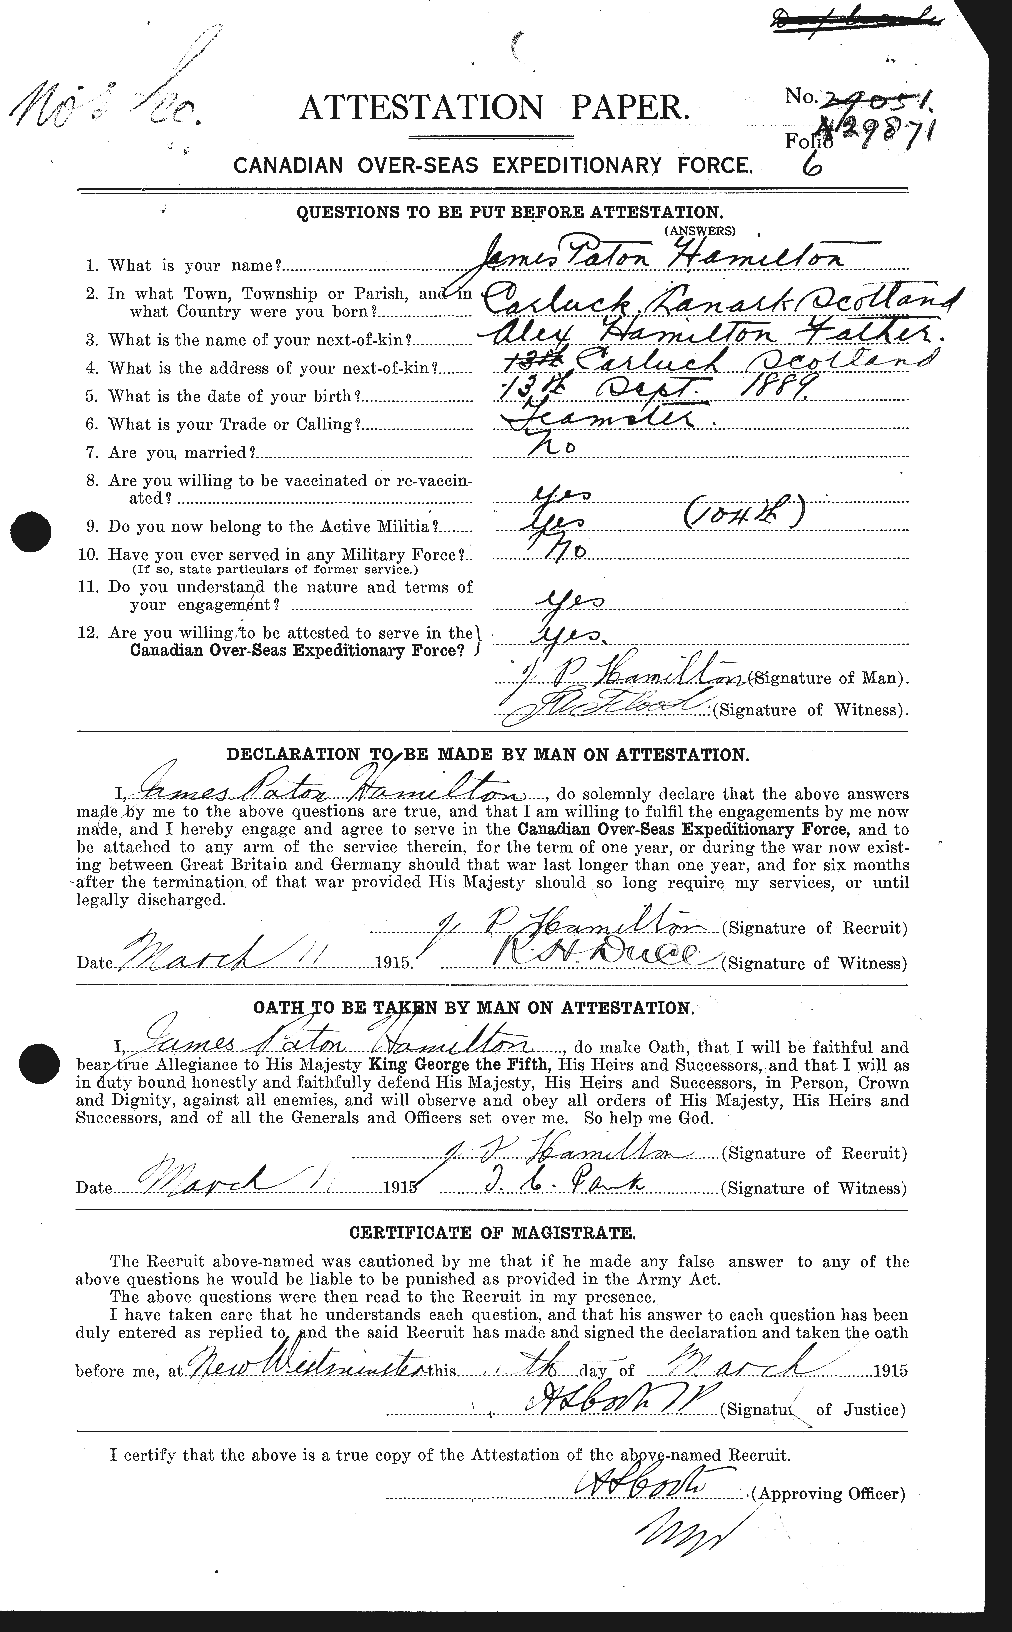 Personnel Records of the First World War - CEF 372993a